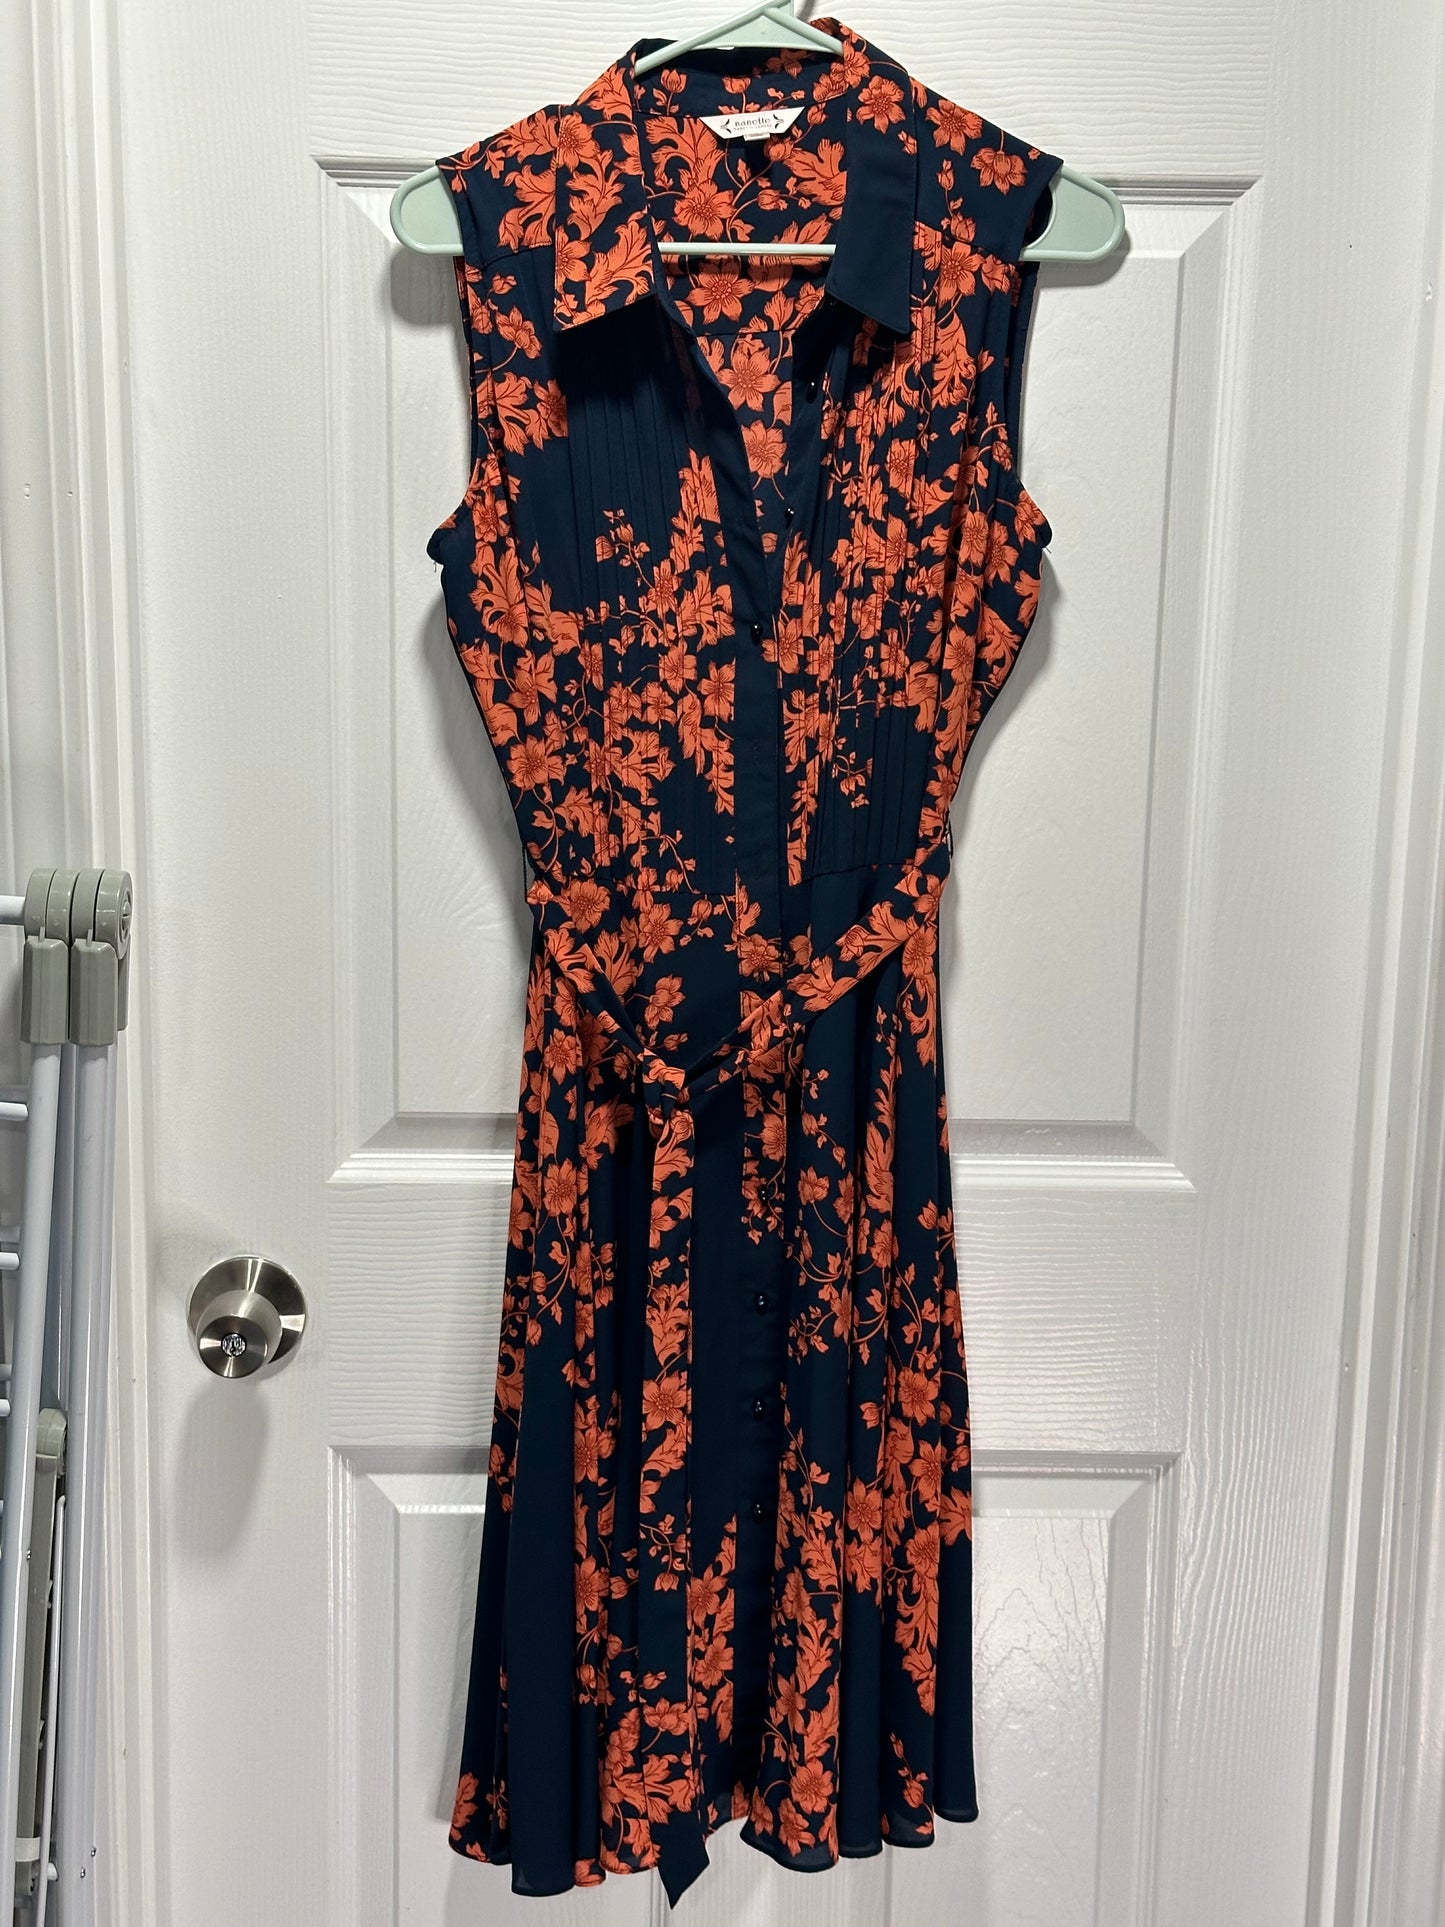 NWOT Nanette Navy Dress with Coral Flowers - size M